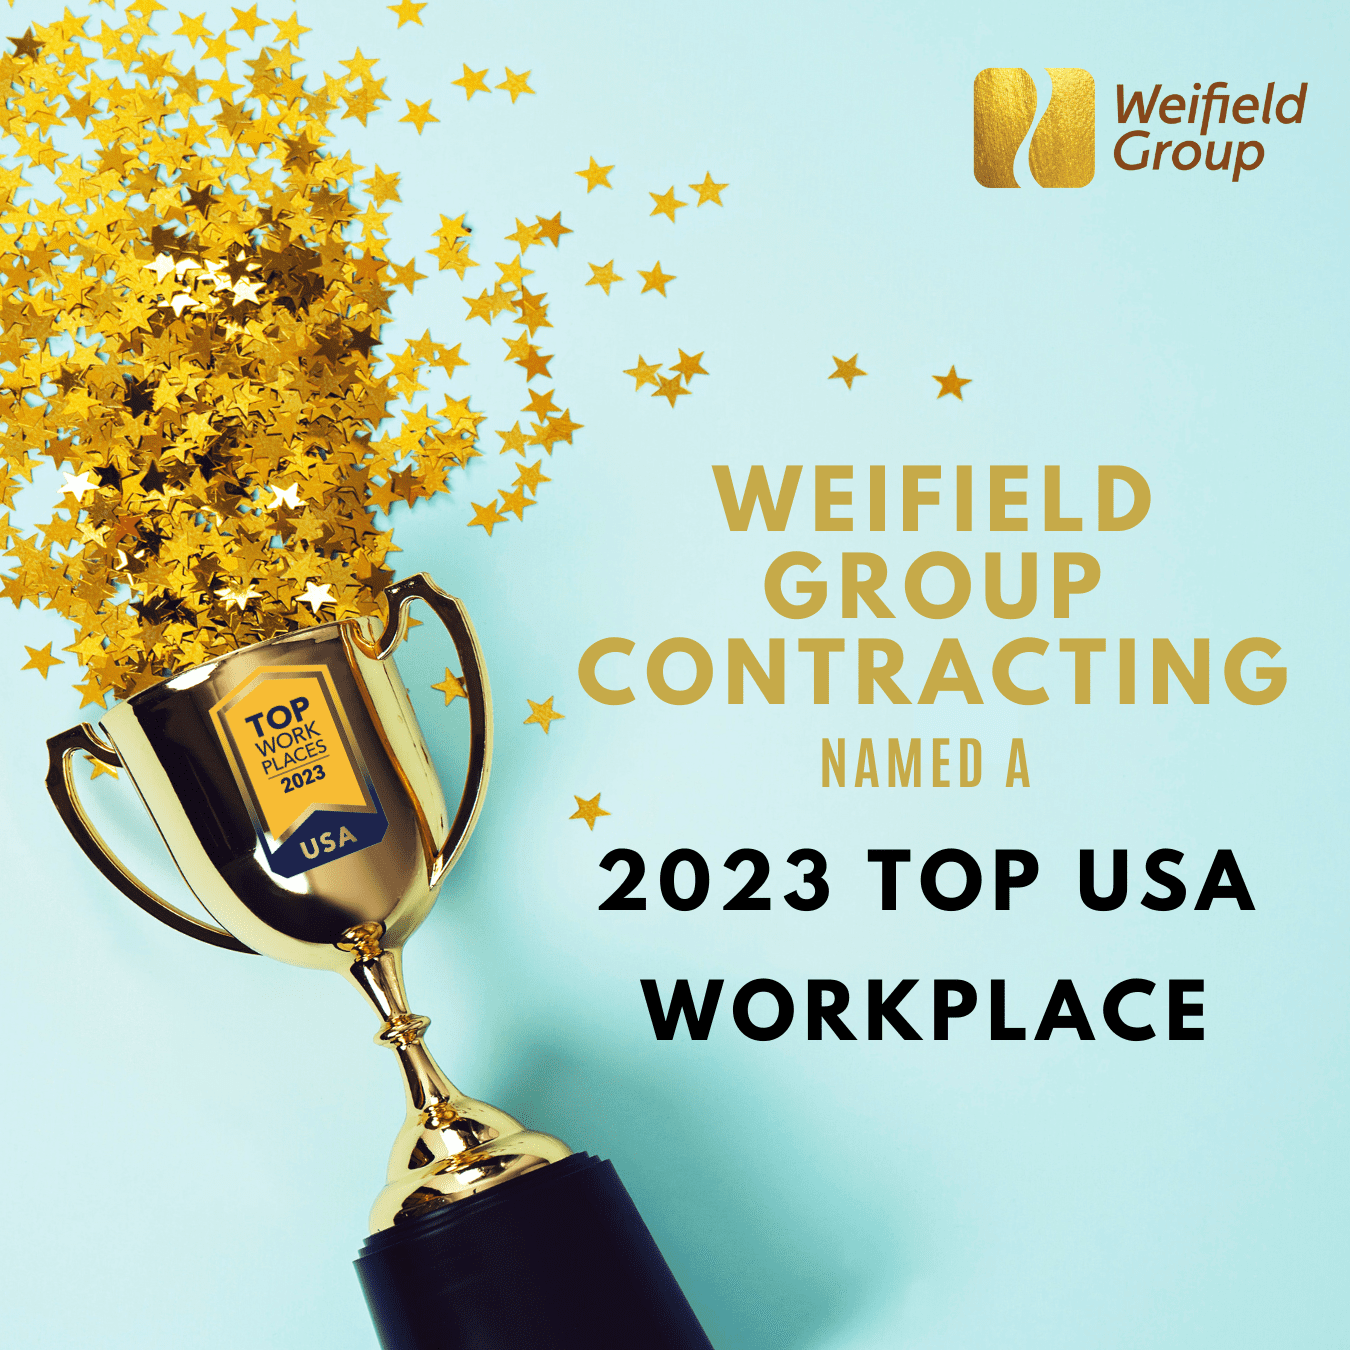 WEIFIELD HONORED WITH 2023 TOP WORKPLACES USA NATIONAL AWARD